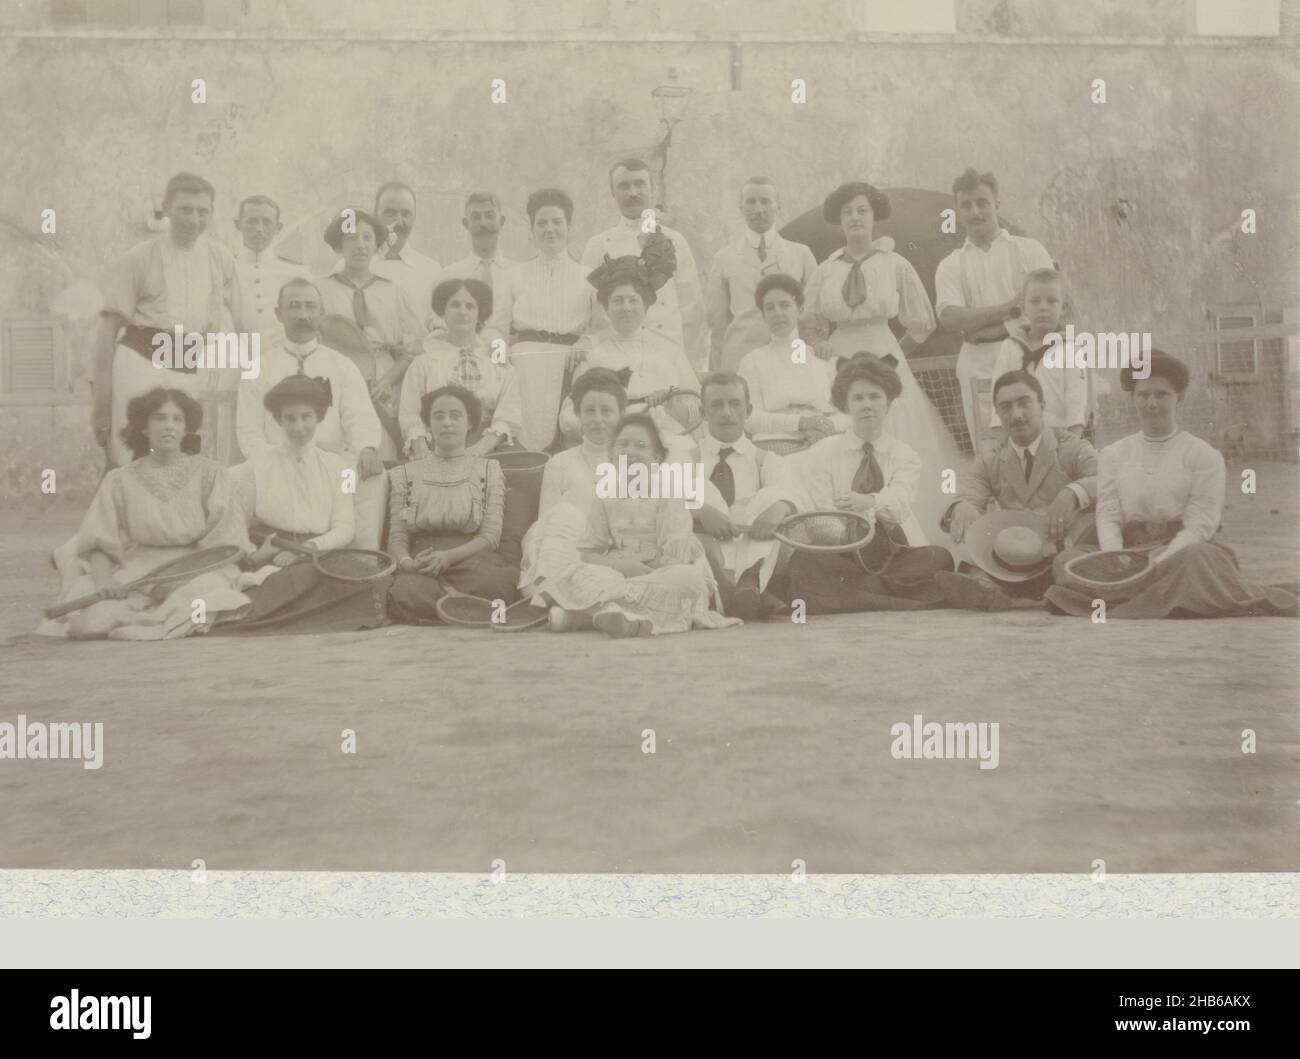 Tennis Club, Group photo of members of a tennis club, probably in Curaçao. Third from the right in the back row is Andries Boom. Next to the photo the names of most of the individuals. The men in the caption indicated by their rank in the Navy. Ca. 1910-1911. Part of the photo album of the Boom-Gonggrijp family in Suriname and Curaçao., Andries Augustus Boom, anonymous, Curaçao, 1910 - 1911, photographic support, height 81 mm × width 109 mm Stock Photo